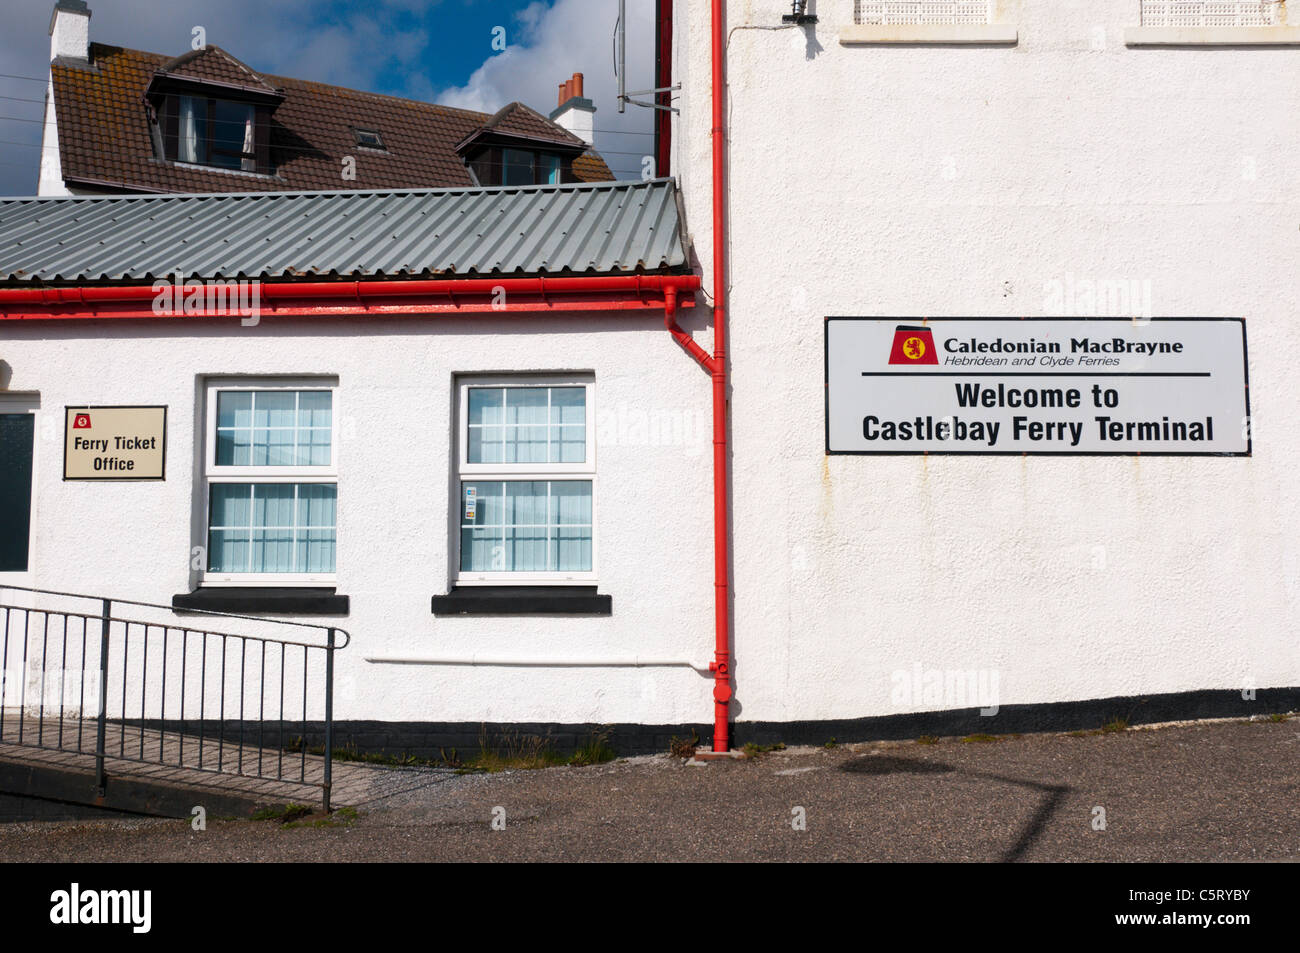 The Caledonian MacBrayne ferry terminal at Castlebay on the island of Barra in the Outer Hebrides. Stock Photo